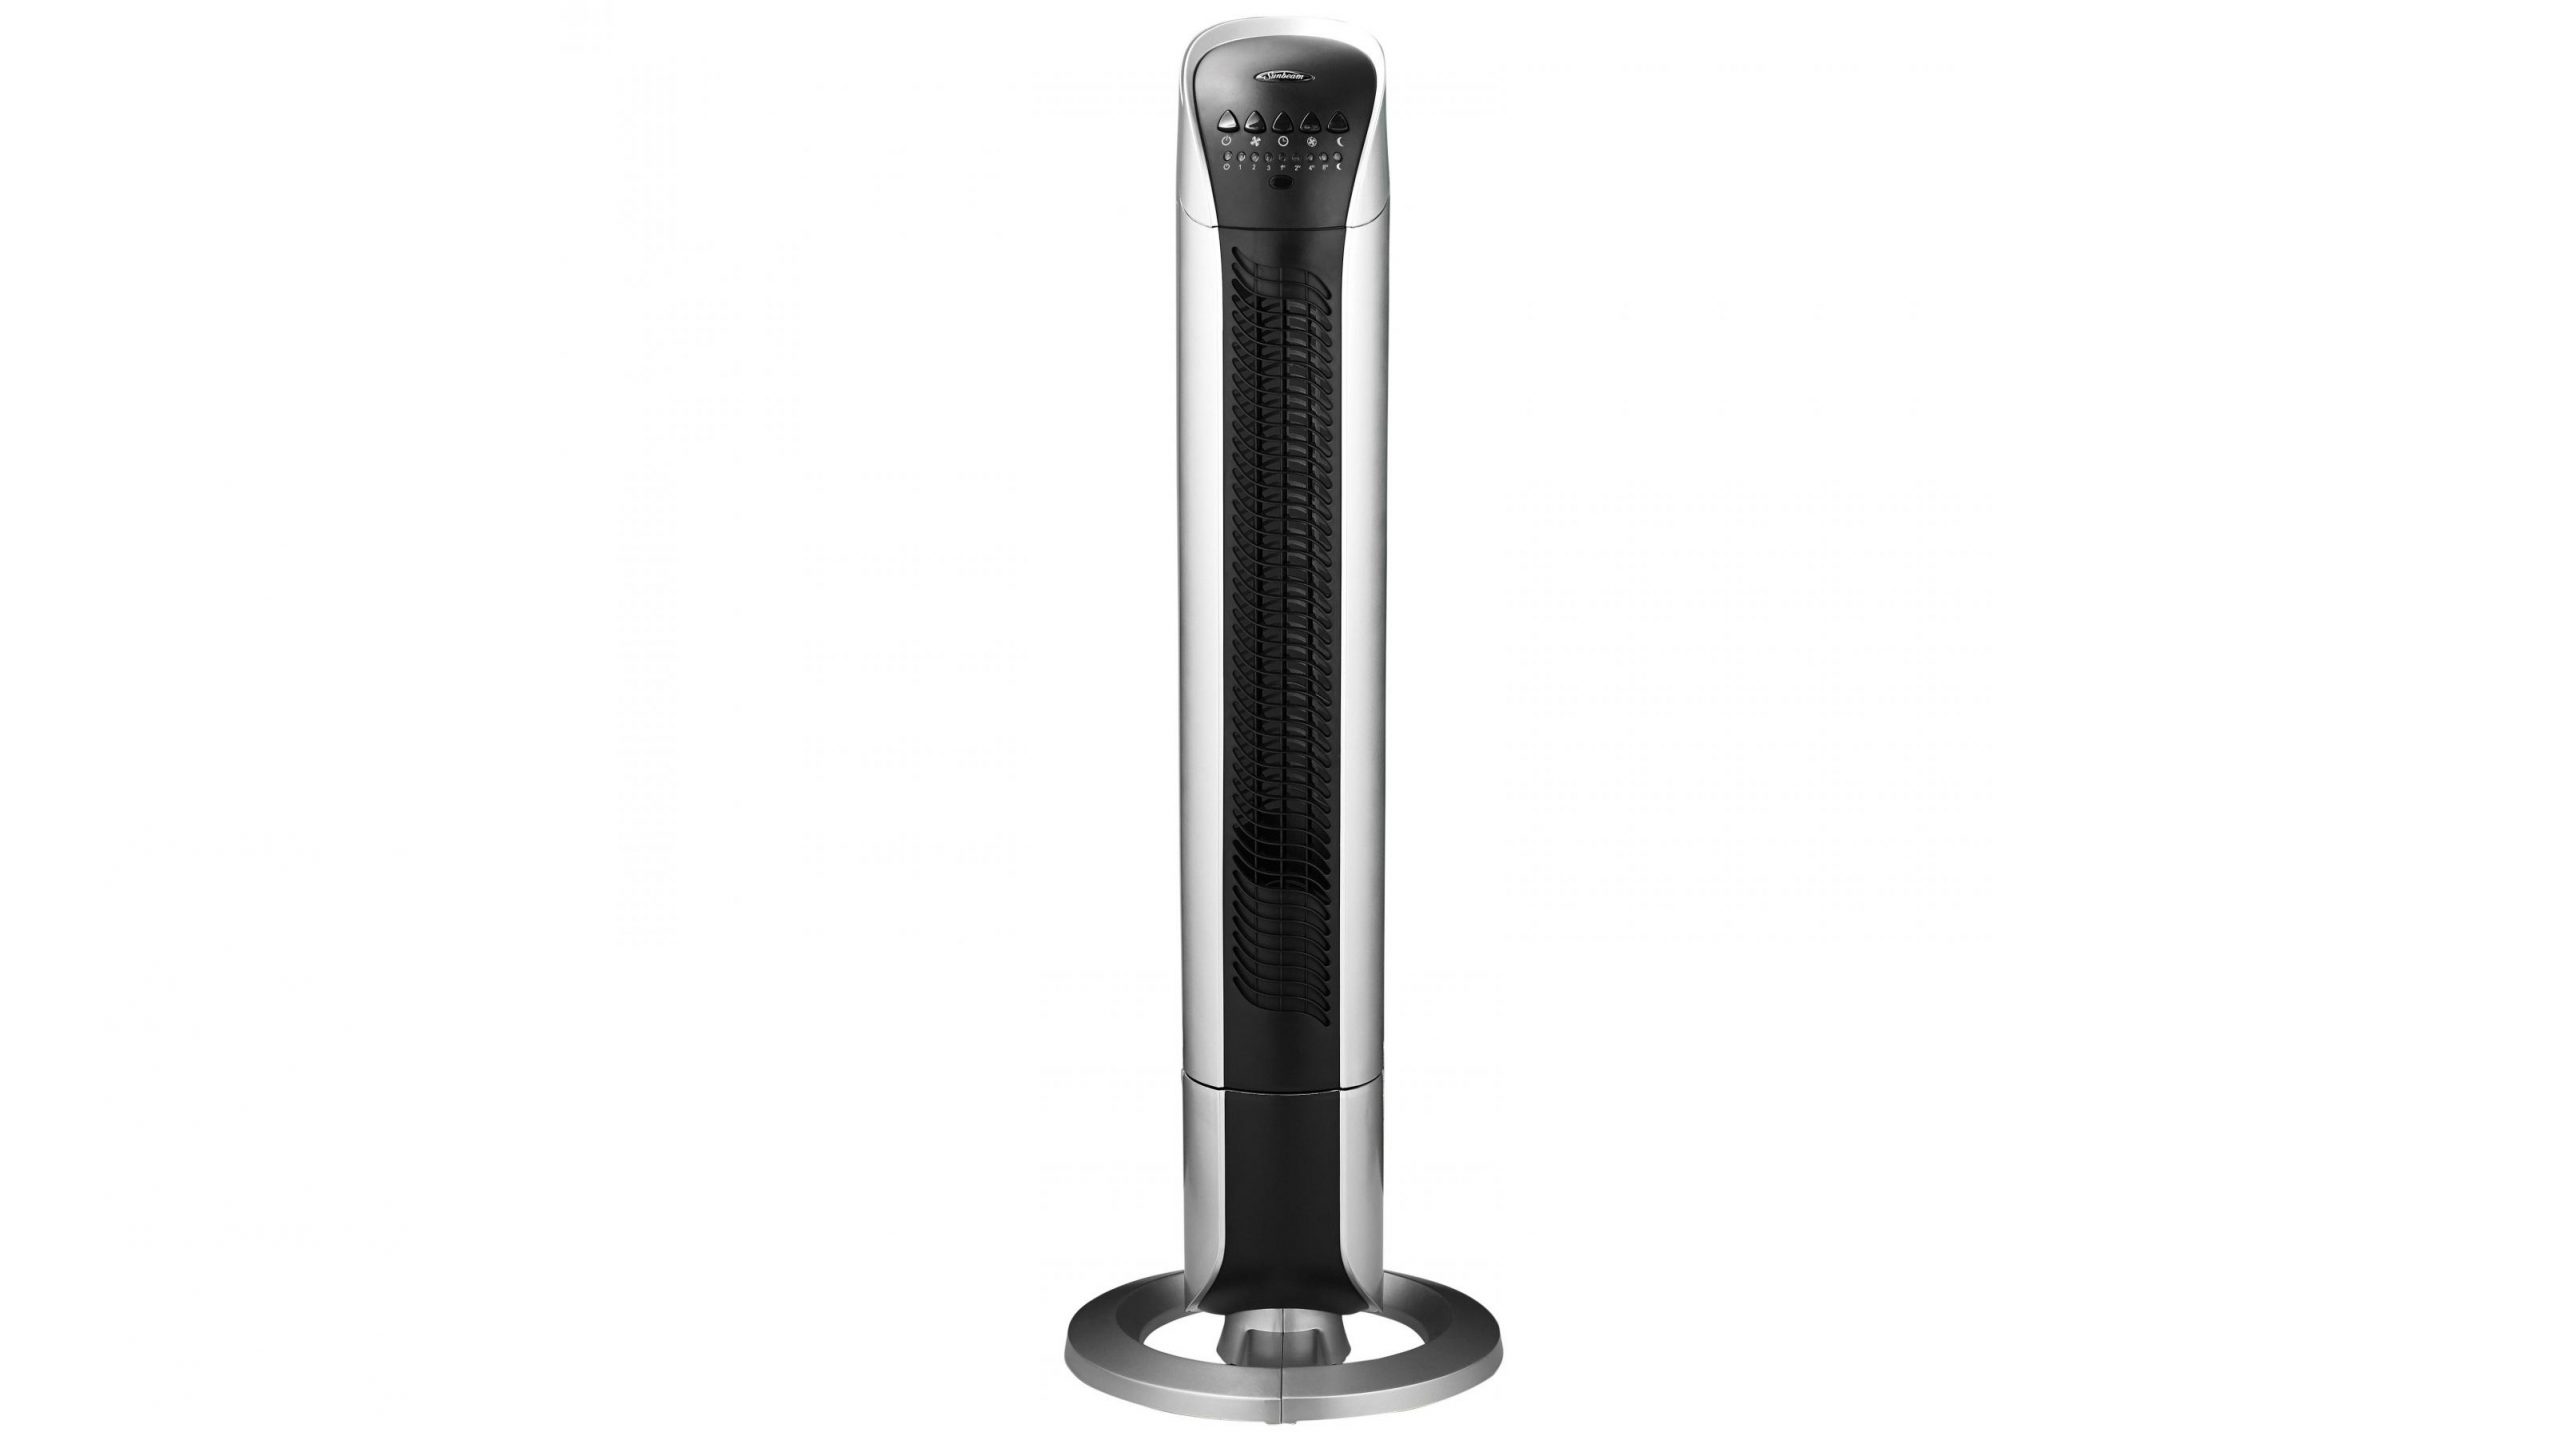 Sunbeam Fa7250 Tower Fan With Night Mode intended for size 3204 X 1802